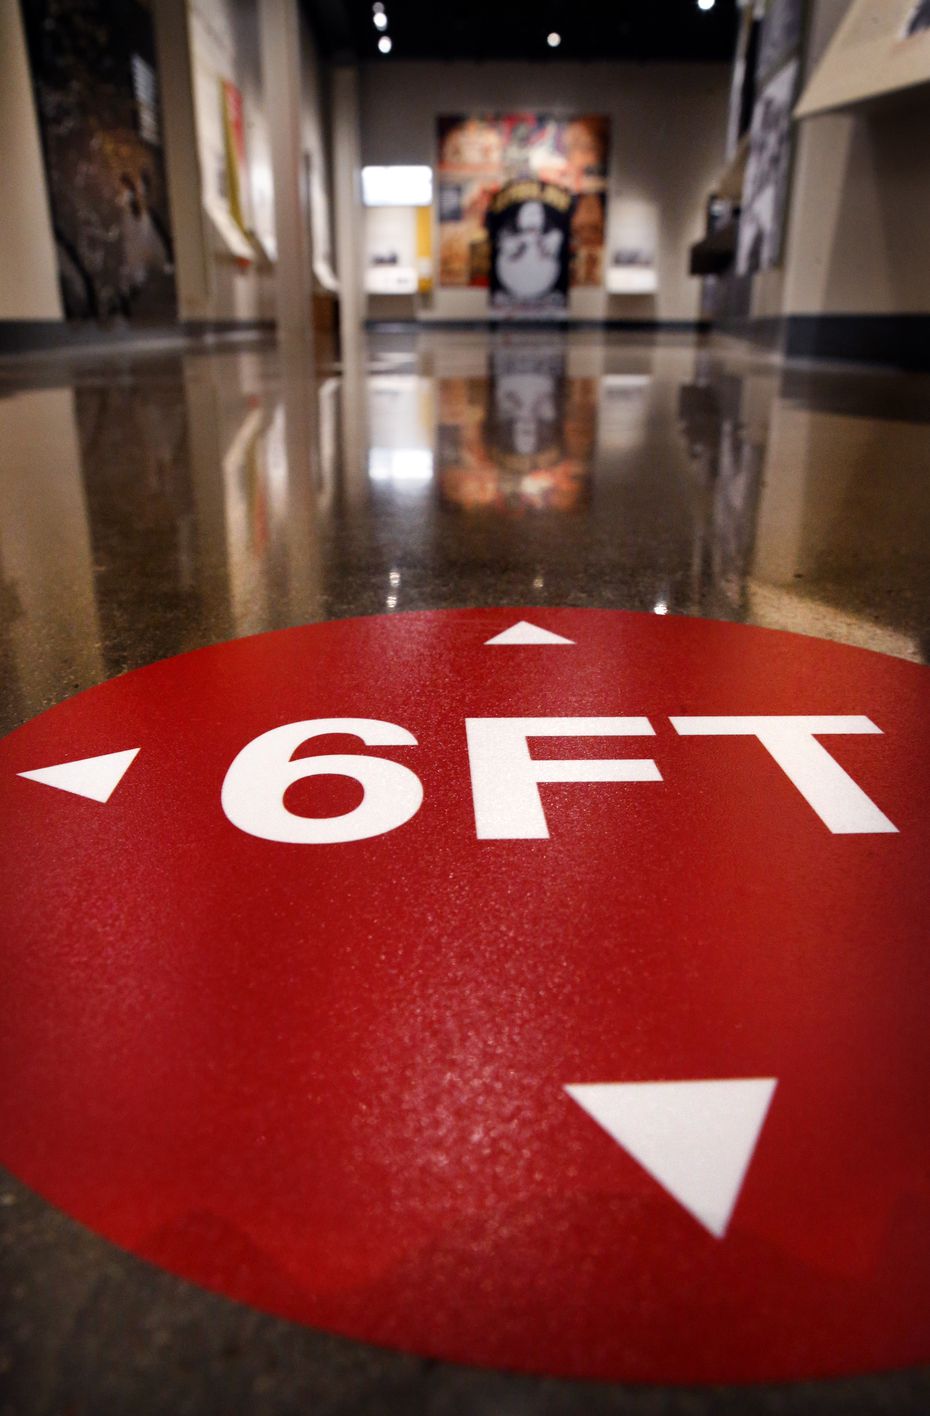 Markers on the floor will remind people to keep 6 ft. spacing while viewing exhibits in the Dallas Holocaust and Human Rights Museum pictured in downtown Dallas, Friday, Aug. 7, 2020.